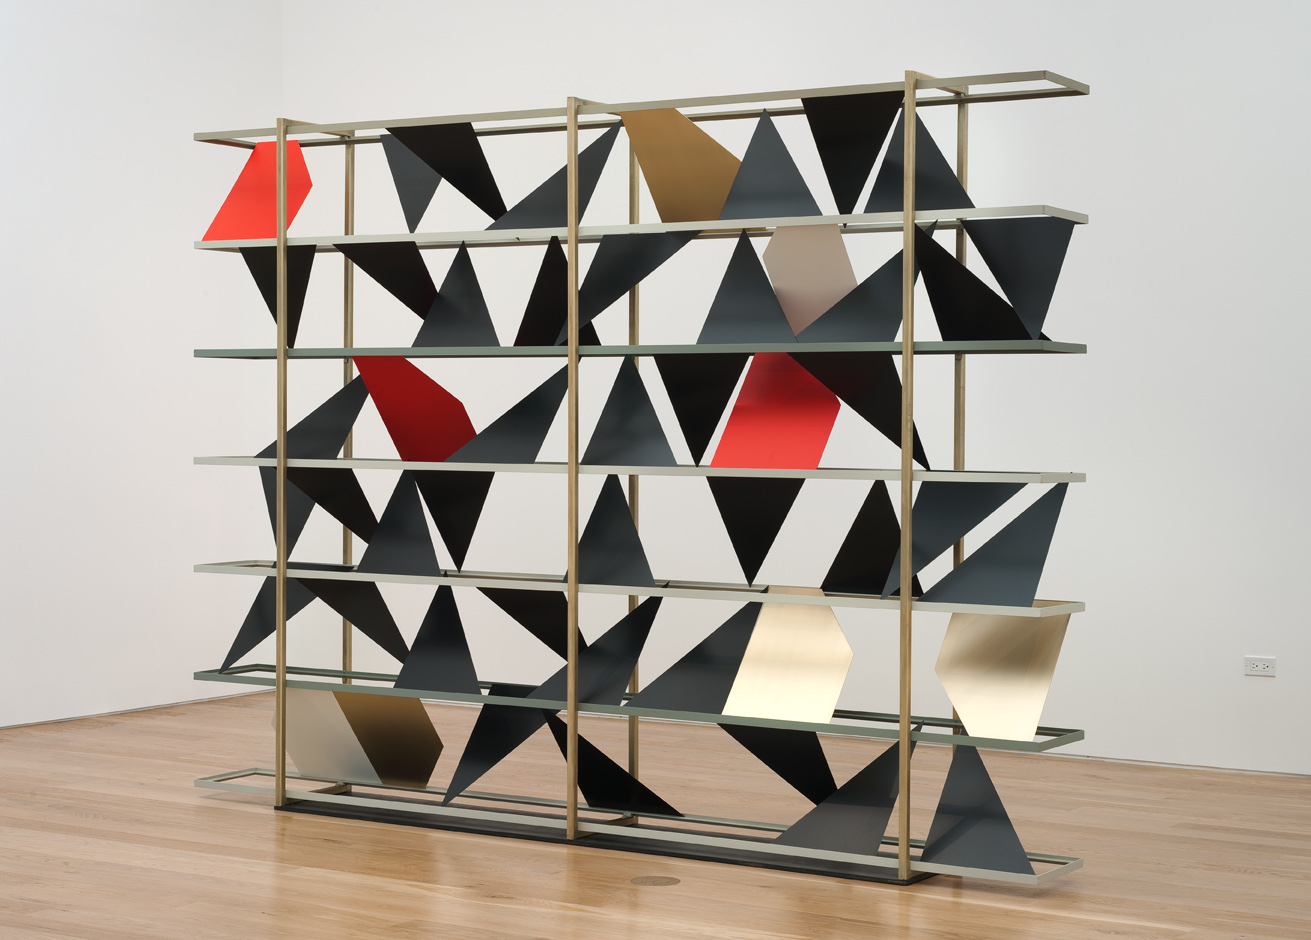  Untitled (screen), 2011-2012  Powder coated steel, brass plated steel and enamel  84 x 120 x 12 inches  213.36 x 304.8 x 30.48 cm       